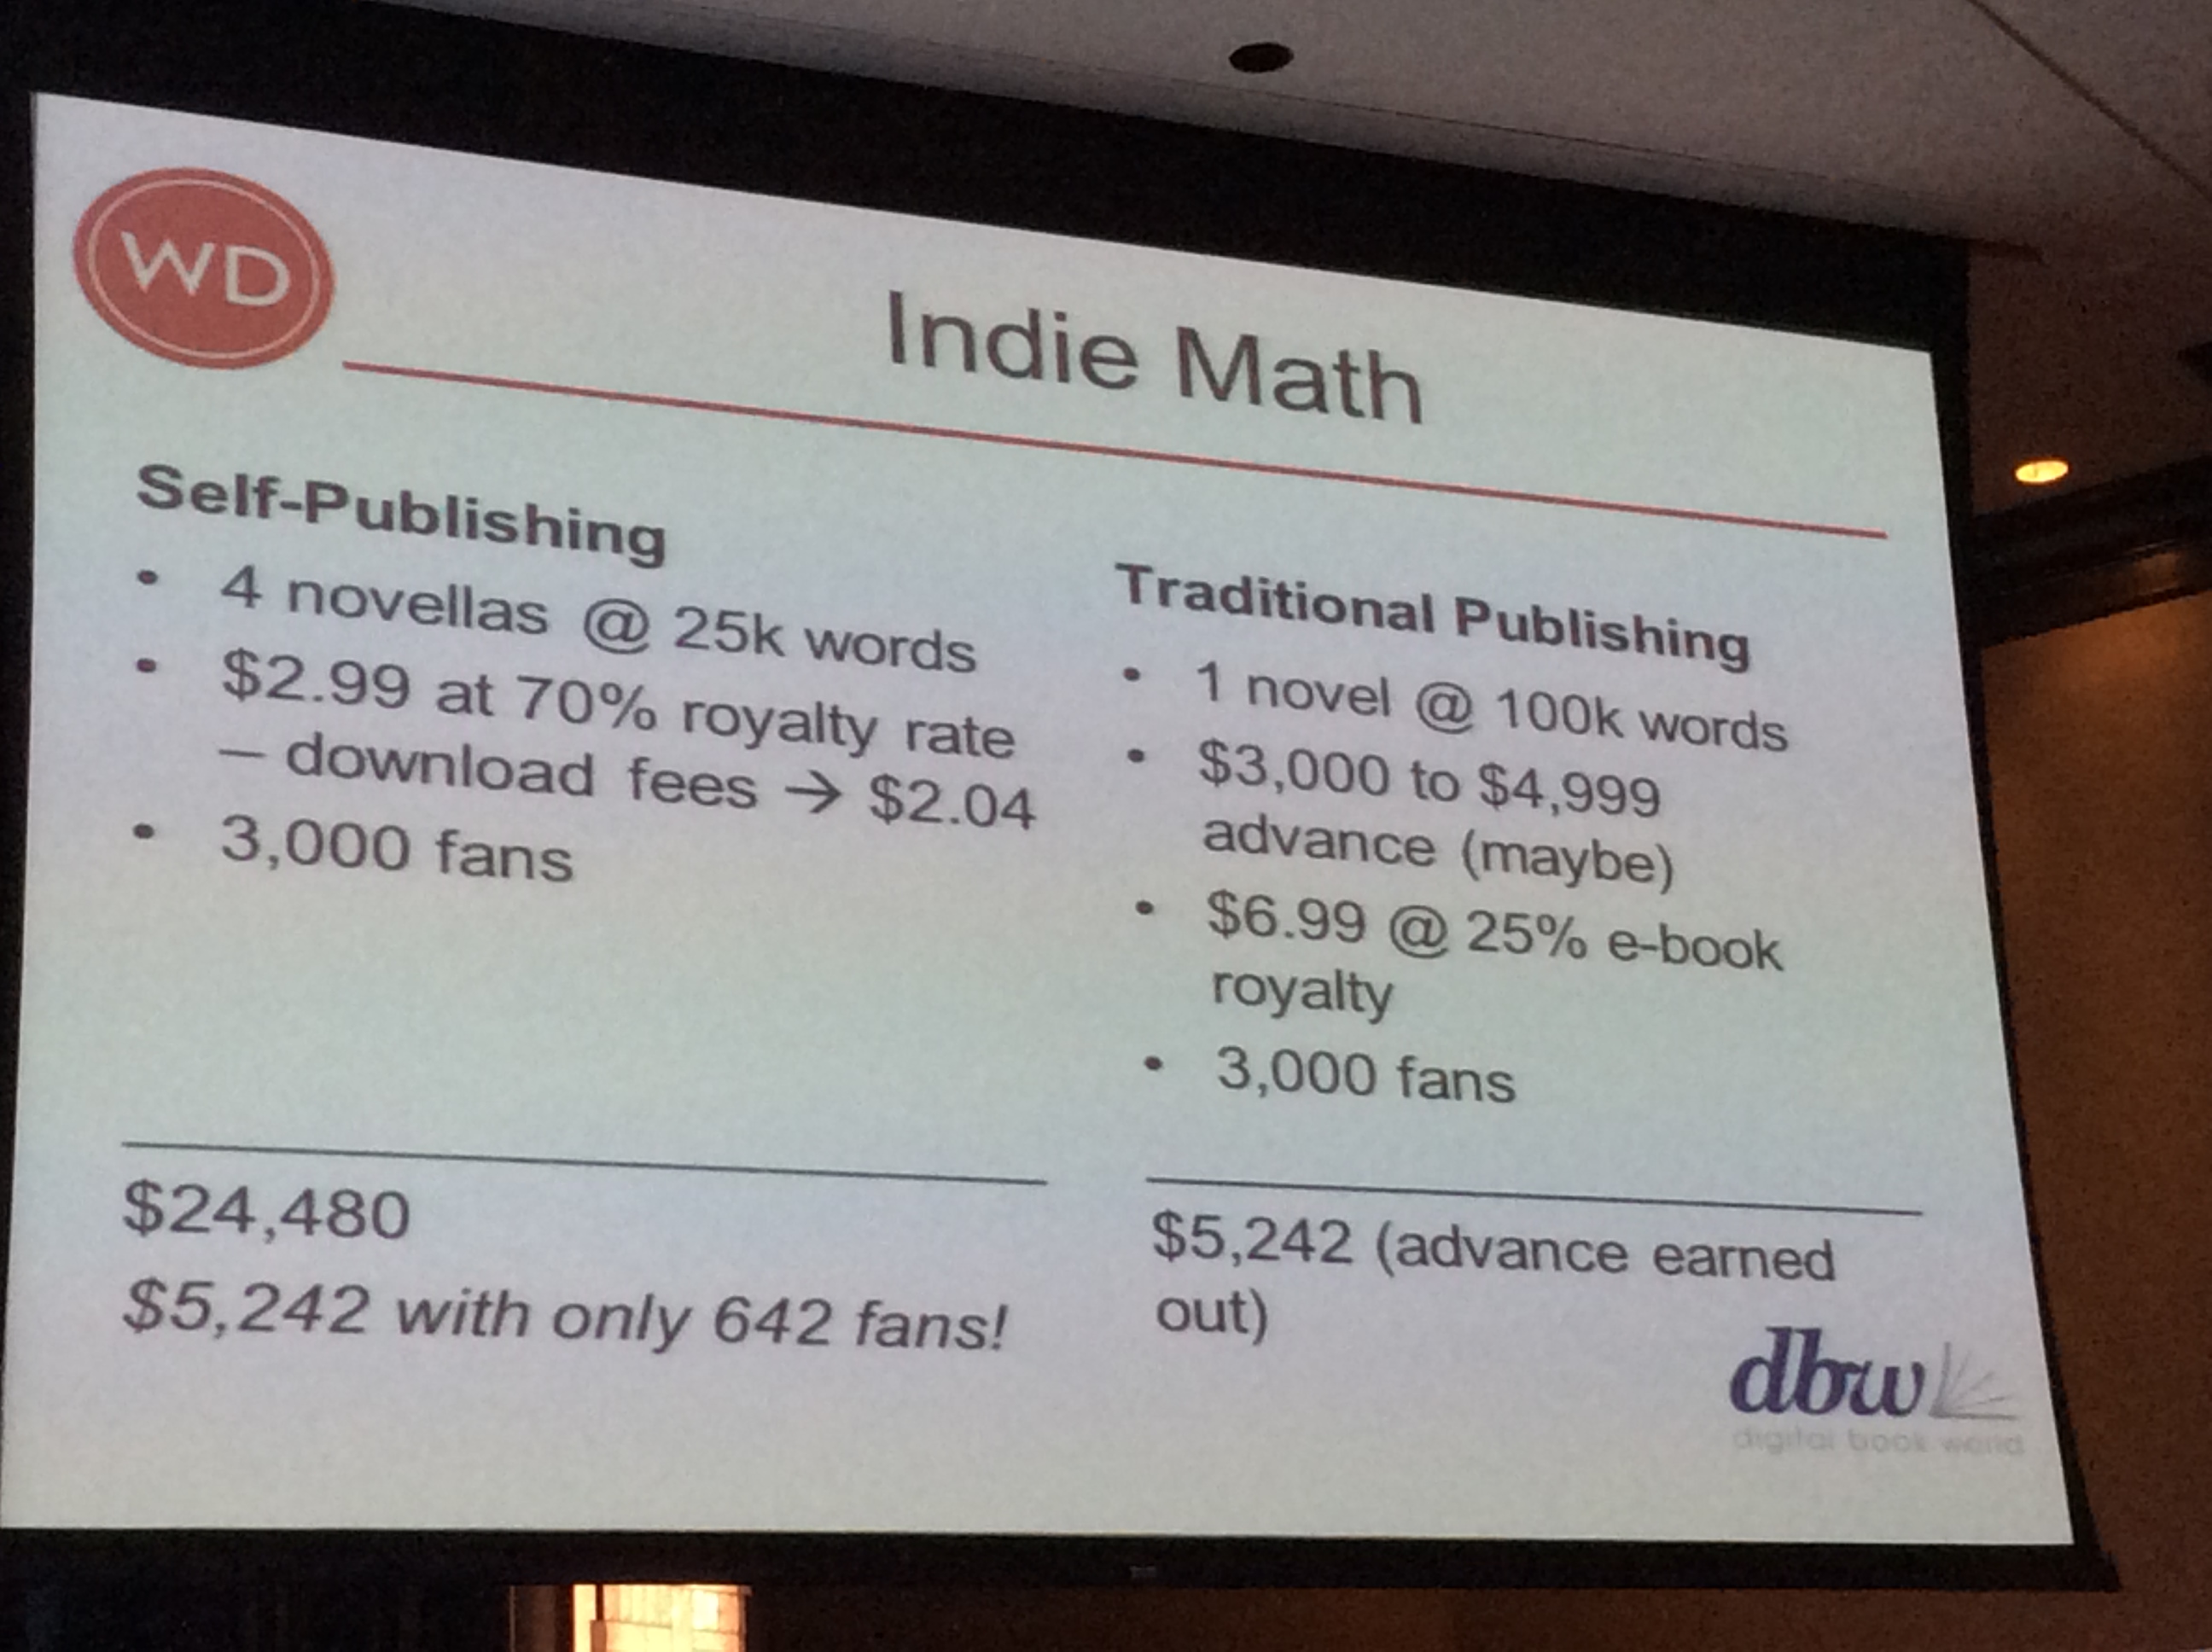 Dana Beth Weinberg's slide on how authors can earn more as self-publishers